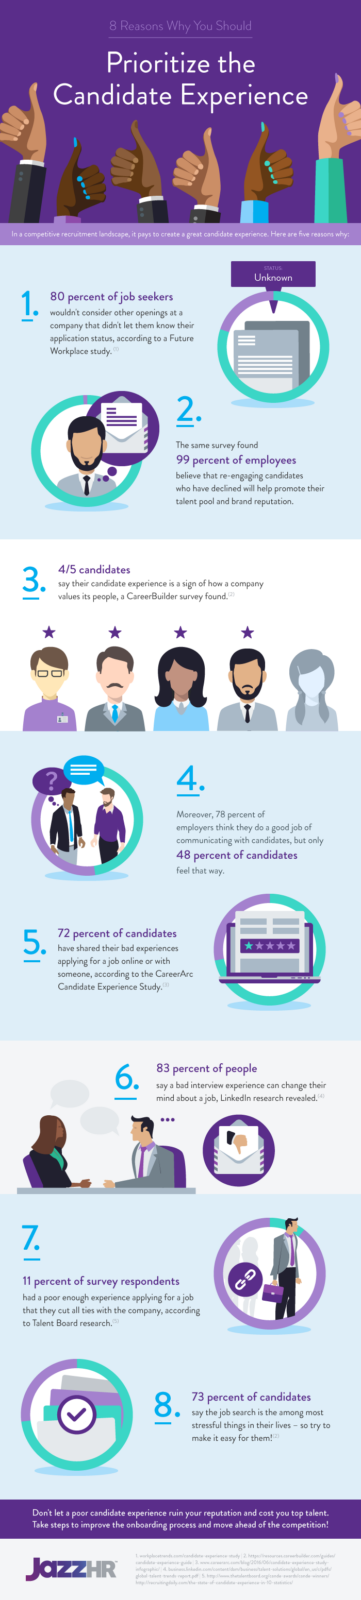 Candidate Experience Infographic